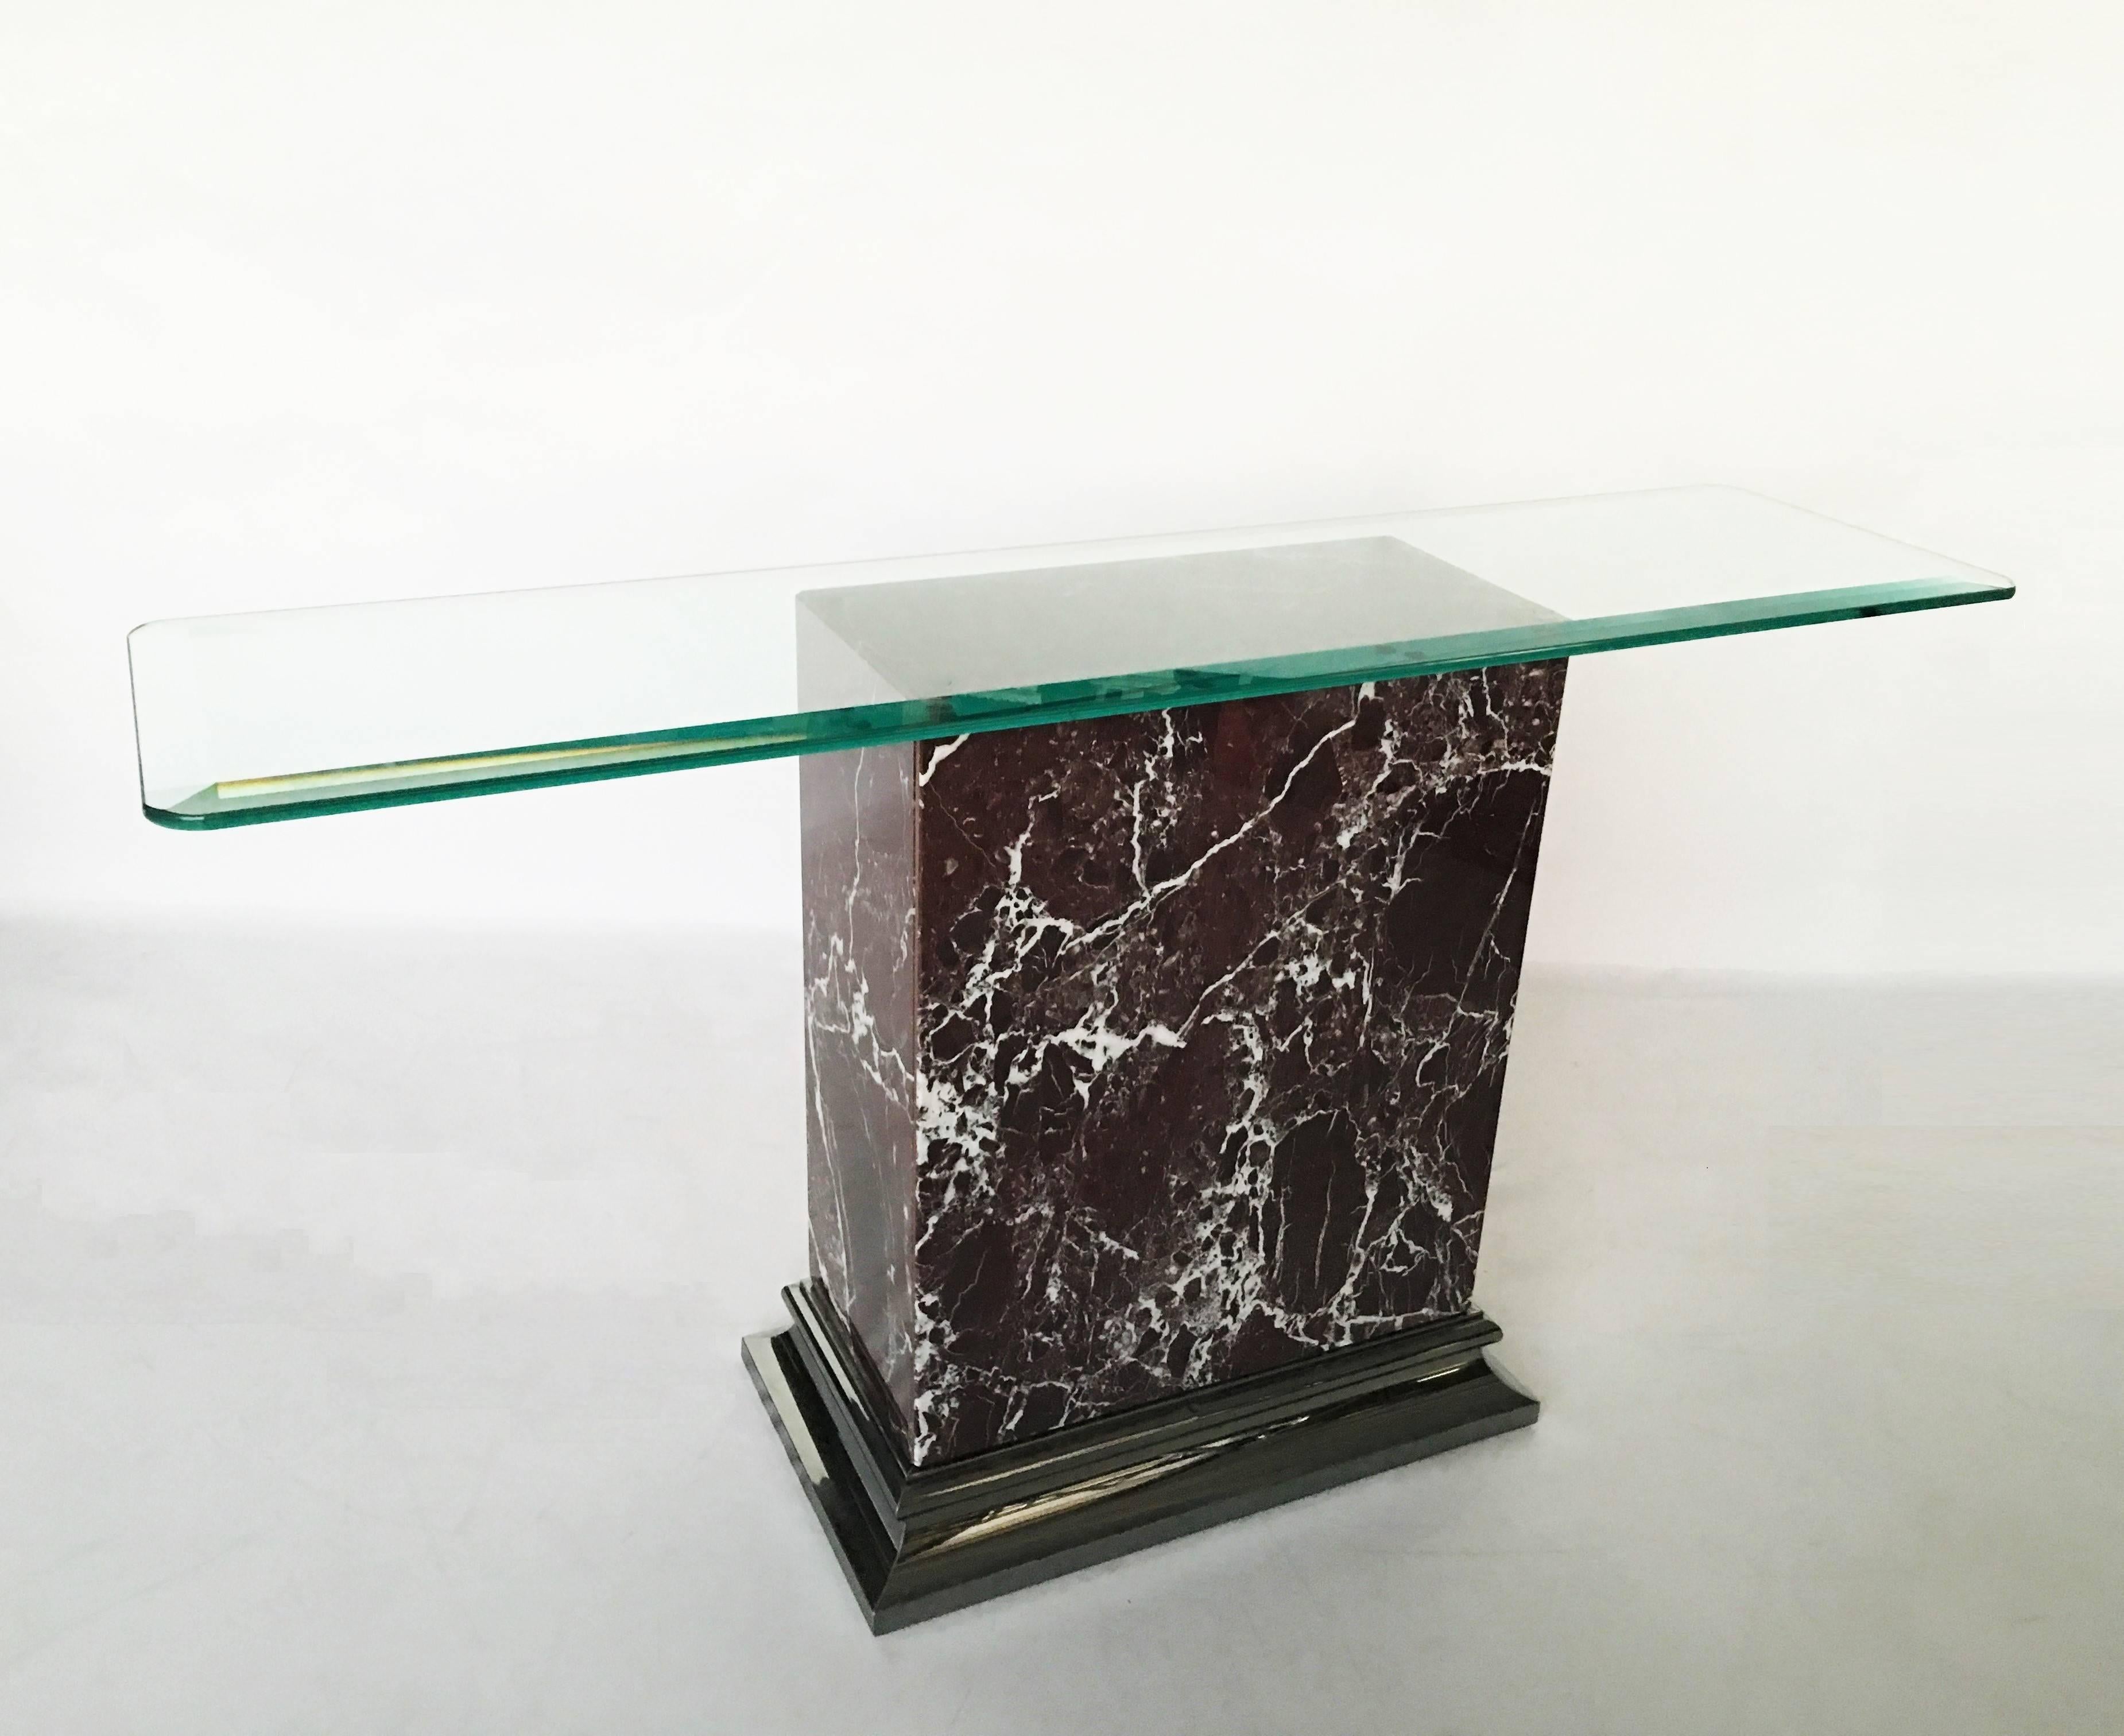 Vintage-modern console featuring Italian marble body with beautifully sculpted nickel trim with beveled glass top. Signed on the inside Made in Italy.

Measures with glass top: 29 in. H x 54 in. W x 14 in. D
Measures without glass top: 28.5 in. H